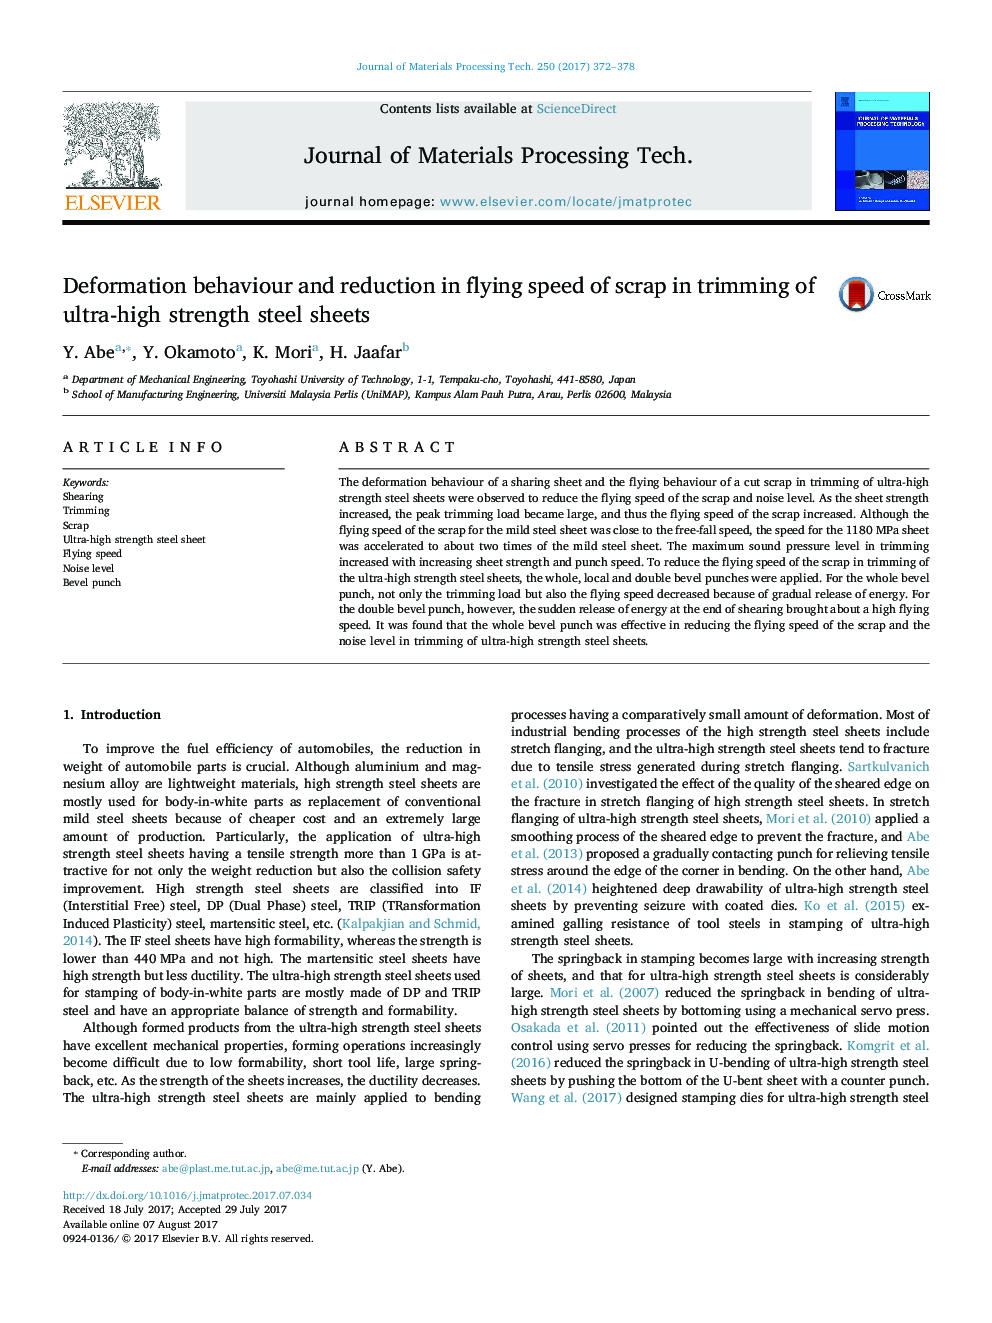 Deformation behaviour and reduction in flying speed of scrap in trimming of ultra-high strength steel sheets